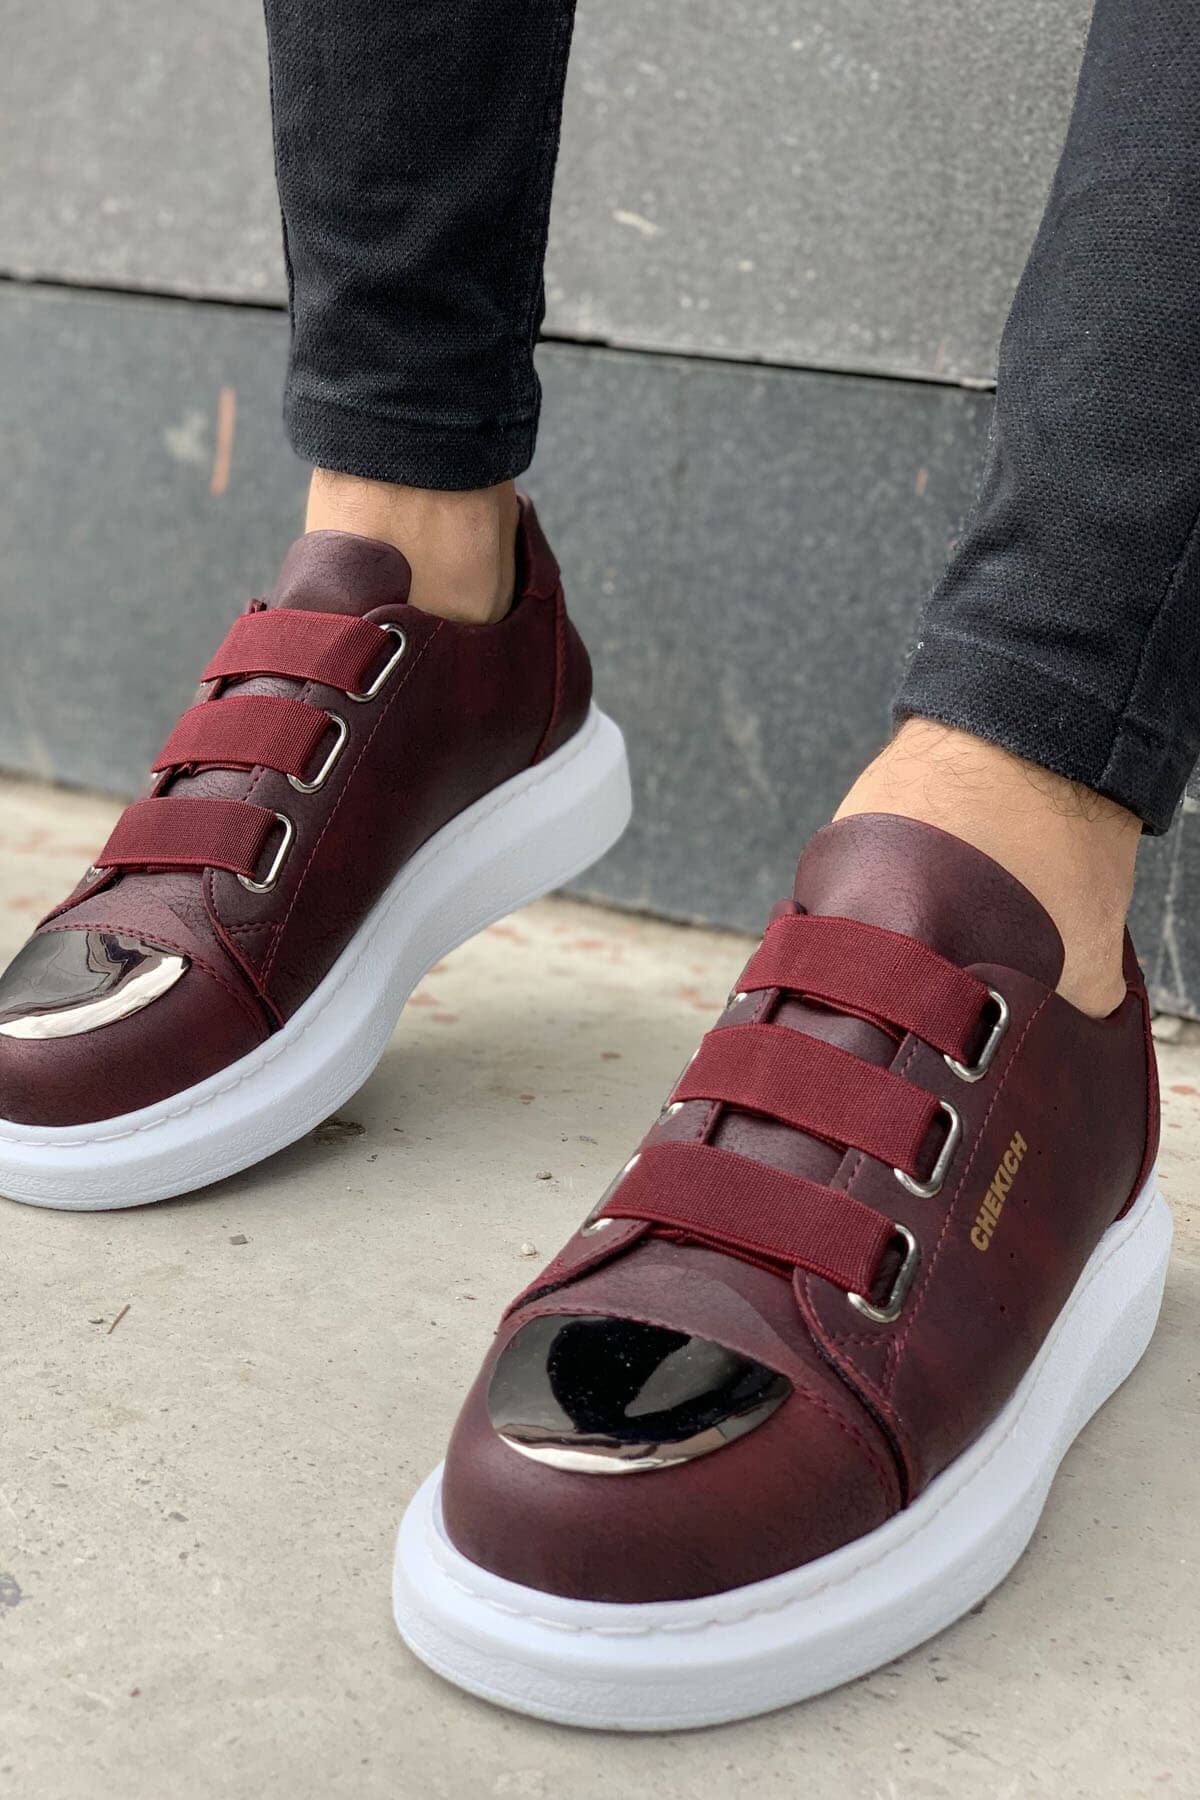 CH251 Men's Unisex Burgundy-New Trend Shiny Accessory Casual Sneaker Sports Shoes - STREETMODE ™